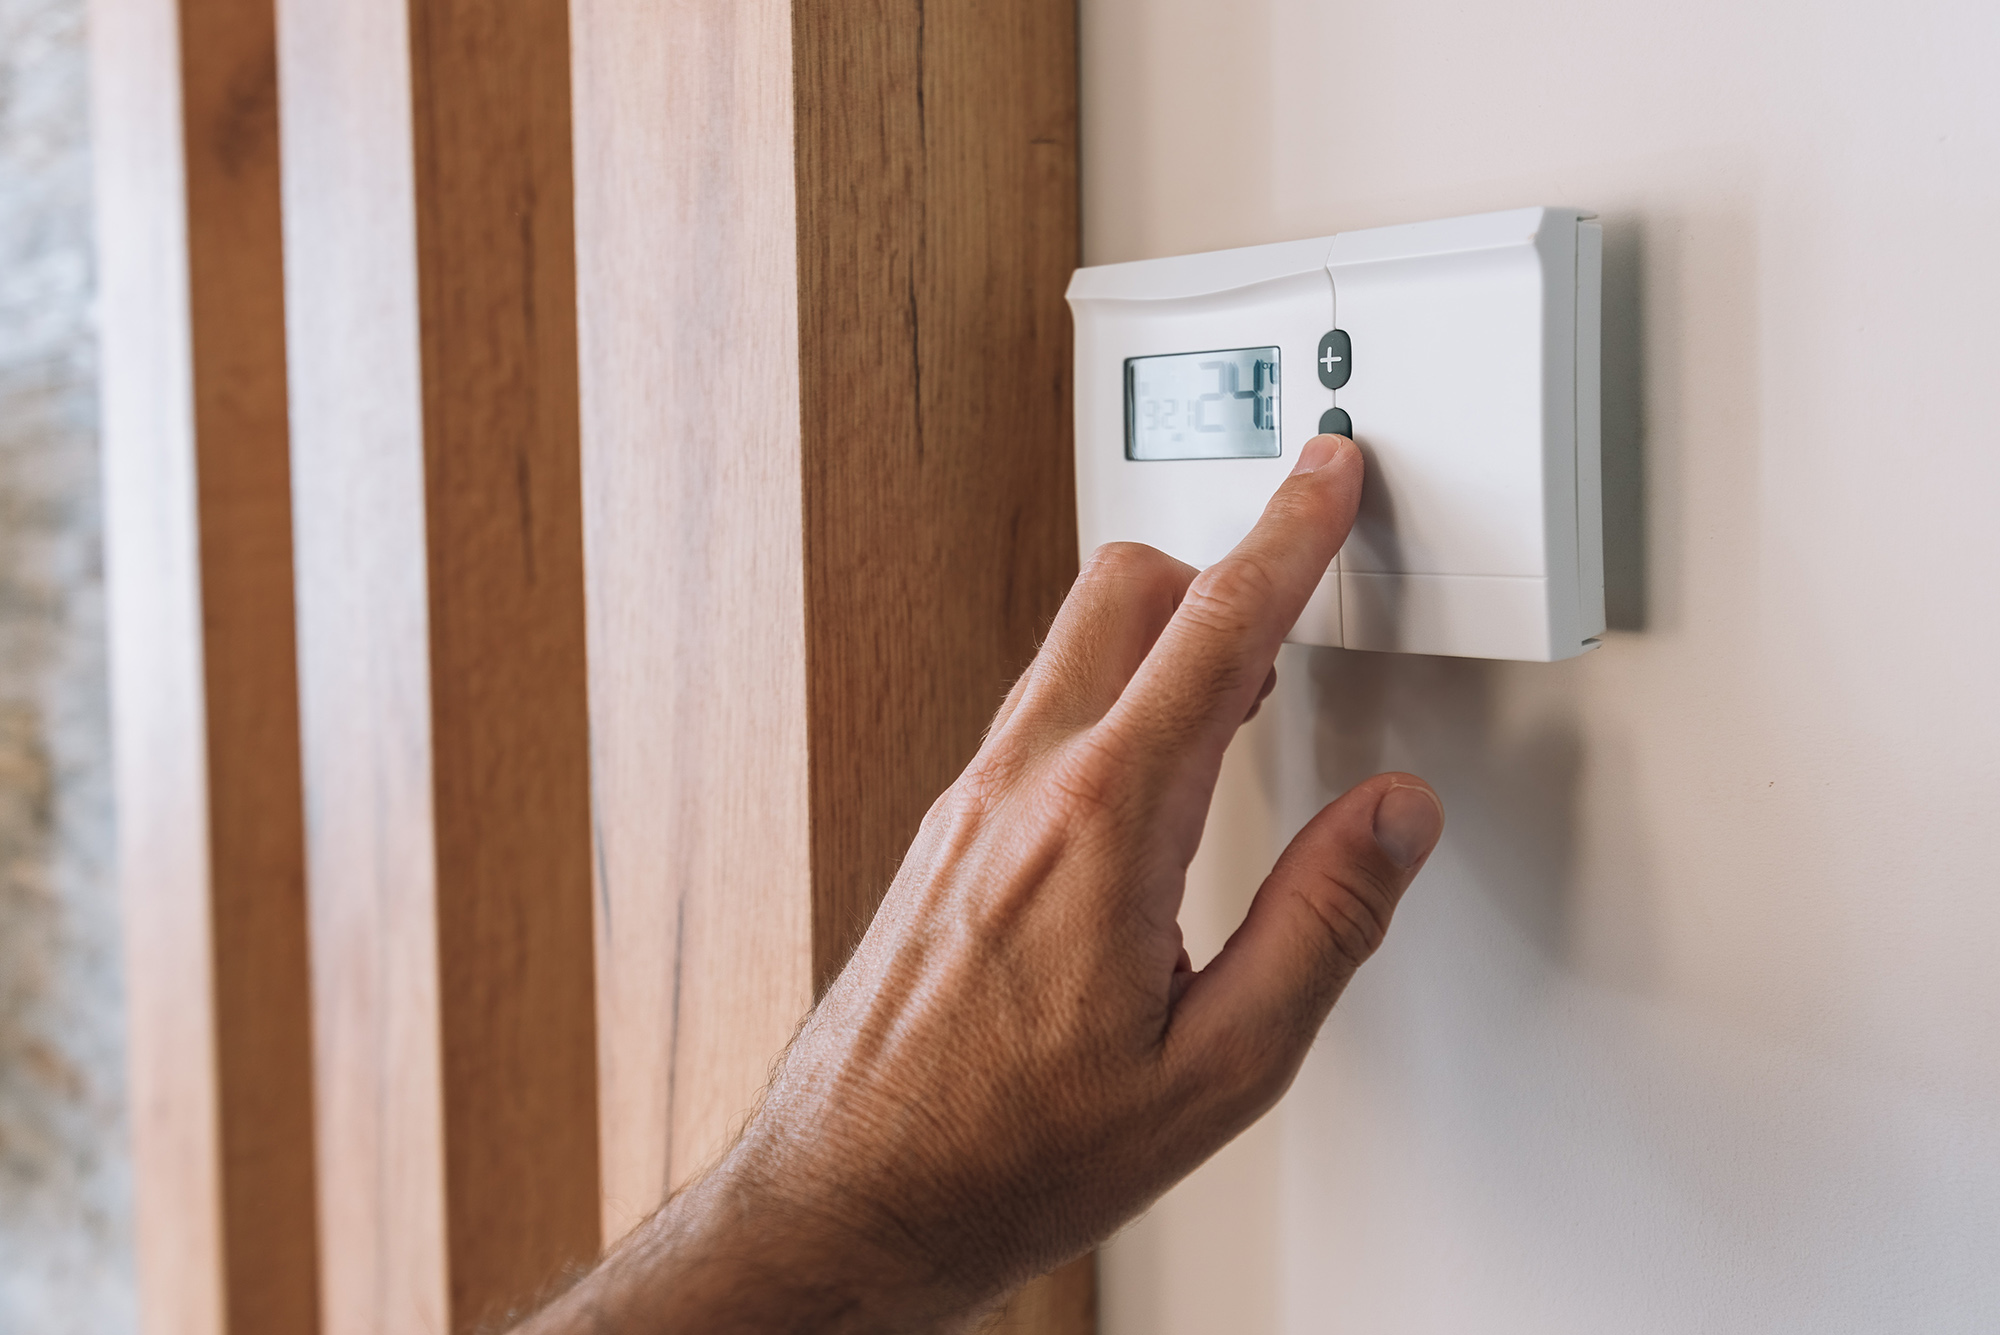 Male hand pushing the button of home heating and cooling system